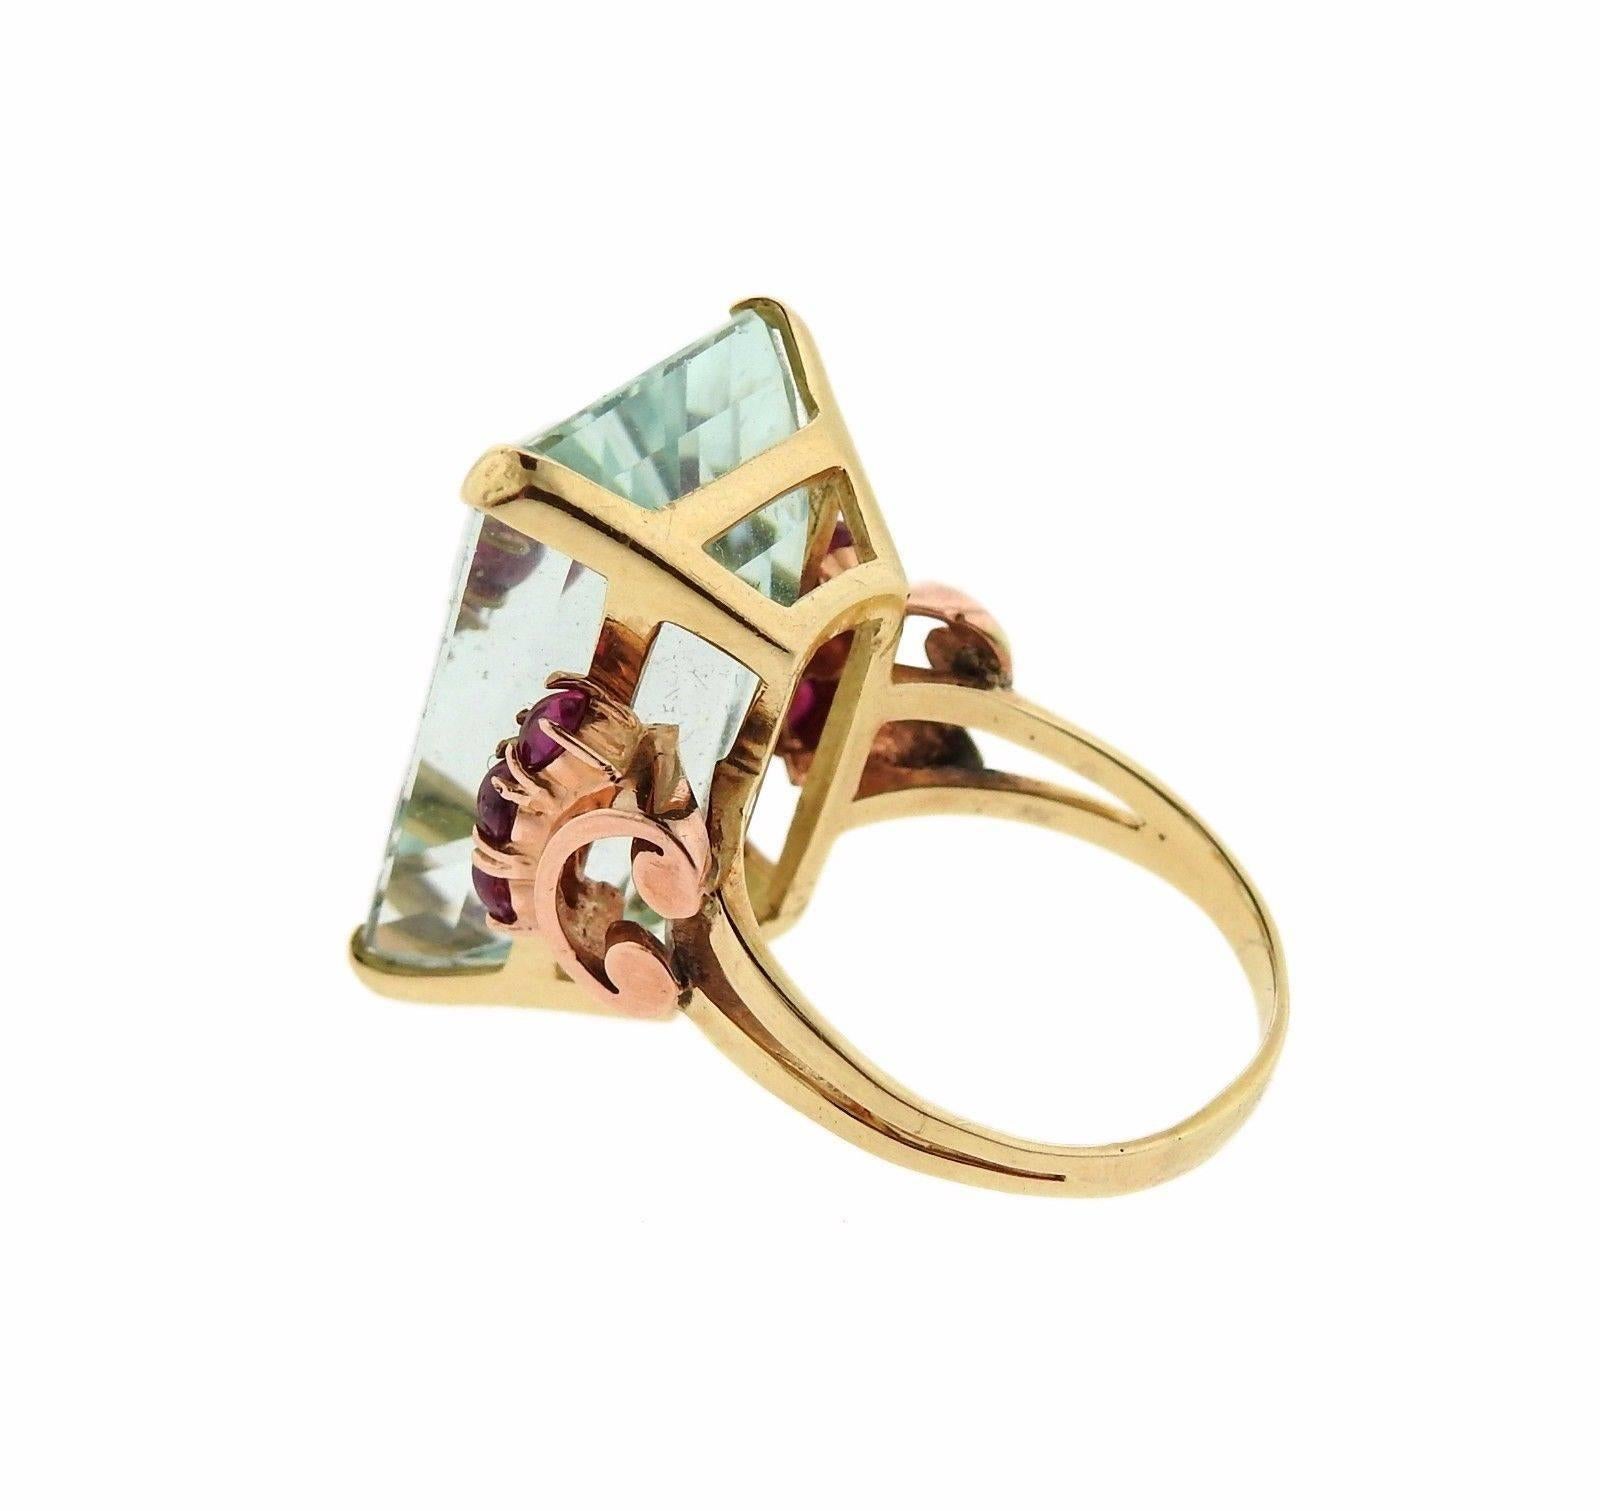 A retro 14k yellow and rose gold ring set with a 29.76ct aquamarine and ruby accents.  The ring is a size 8.5.  The weight of the ring is 13.2 grams. Marked: 14k.